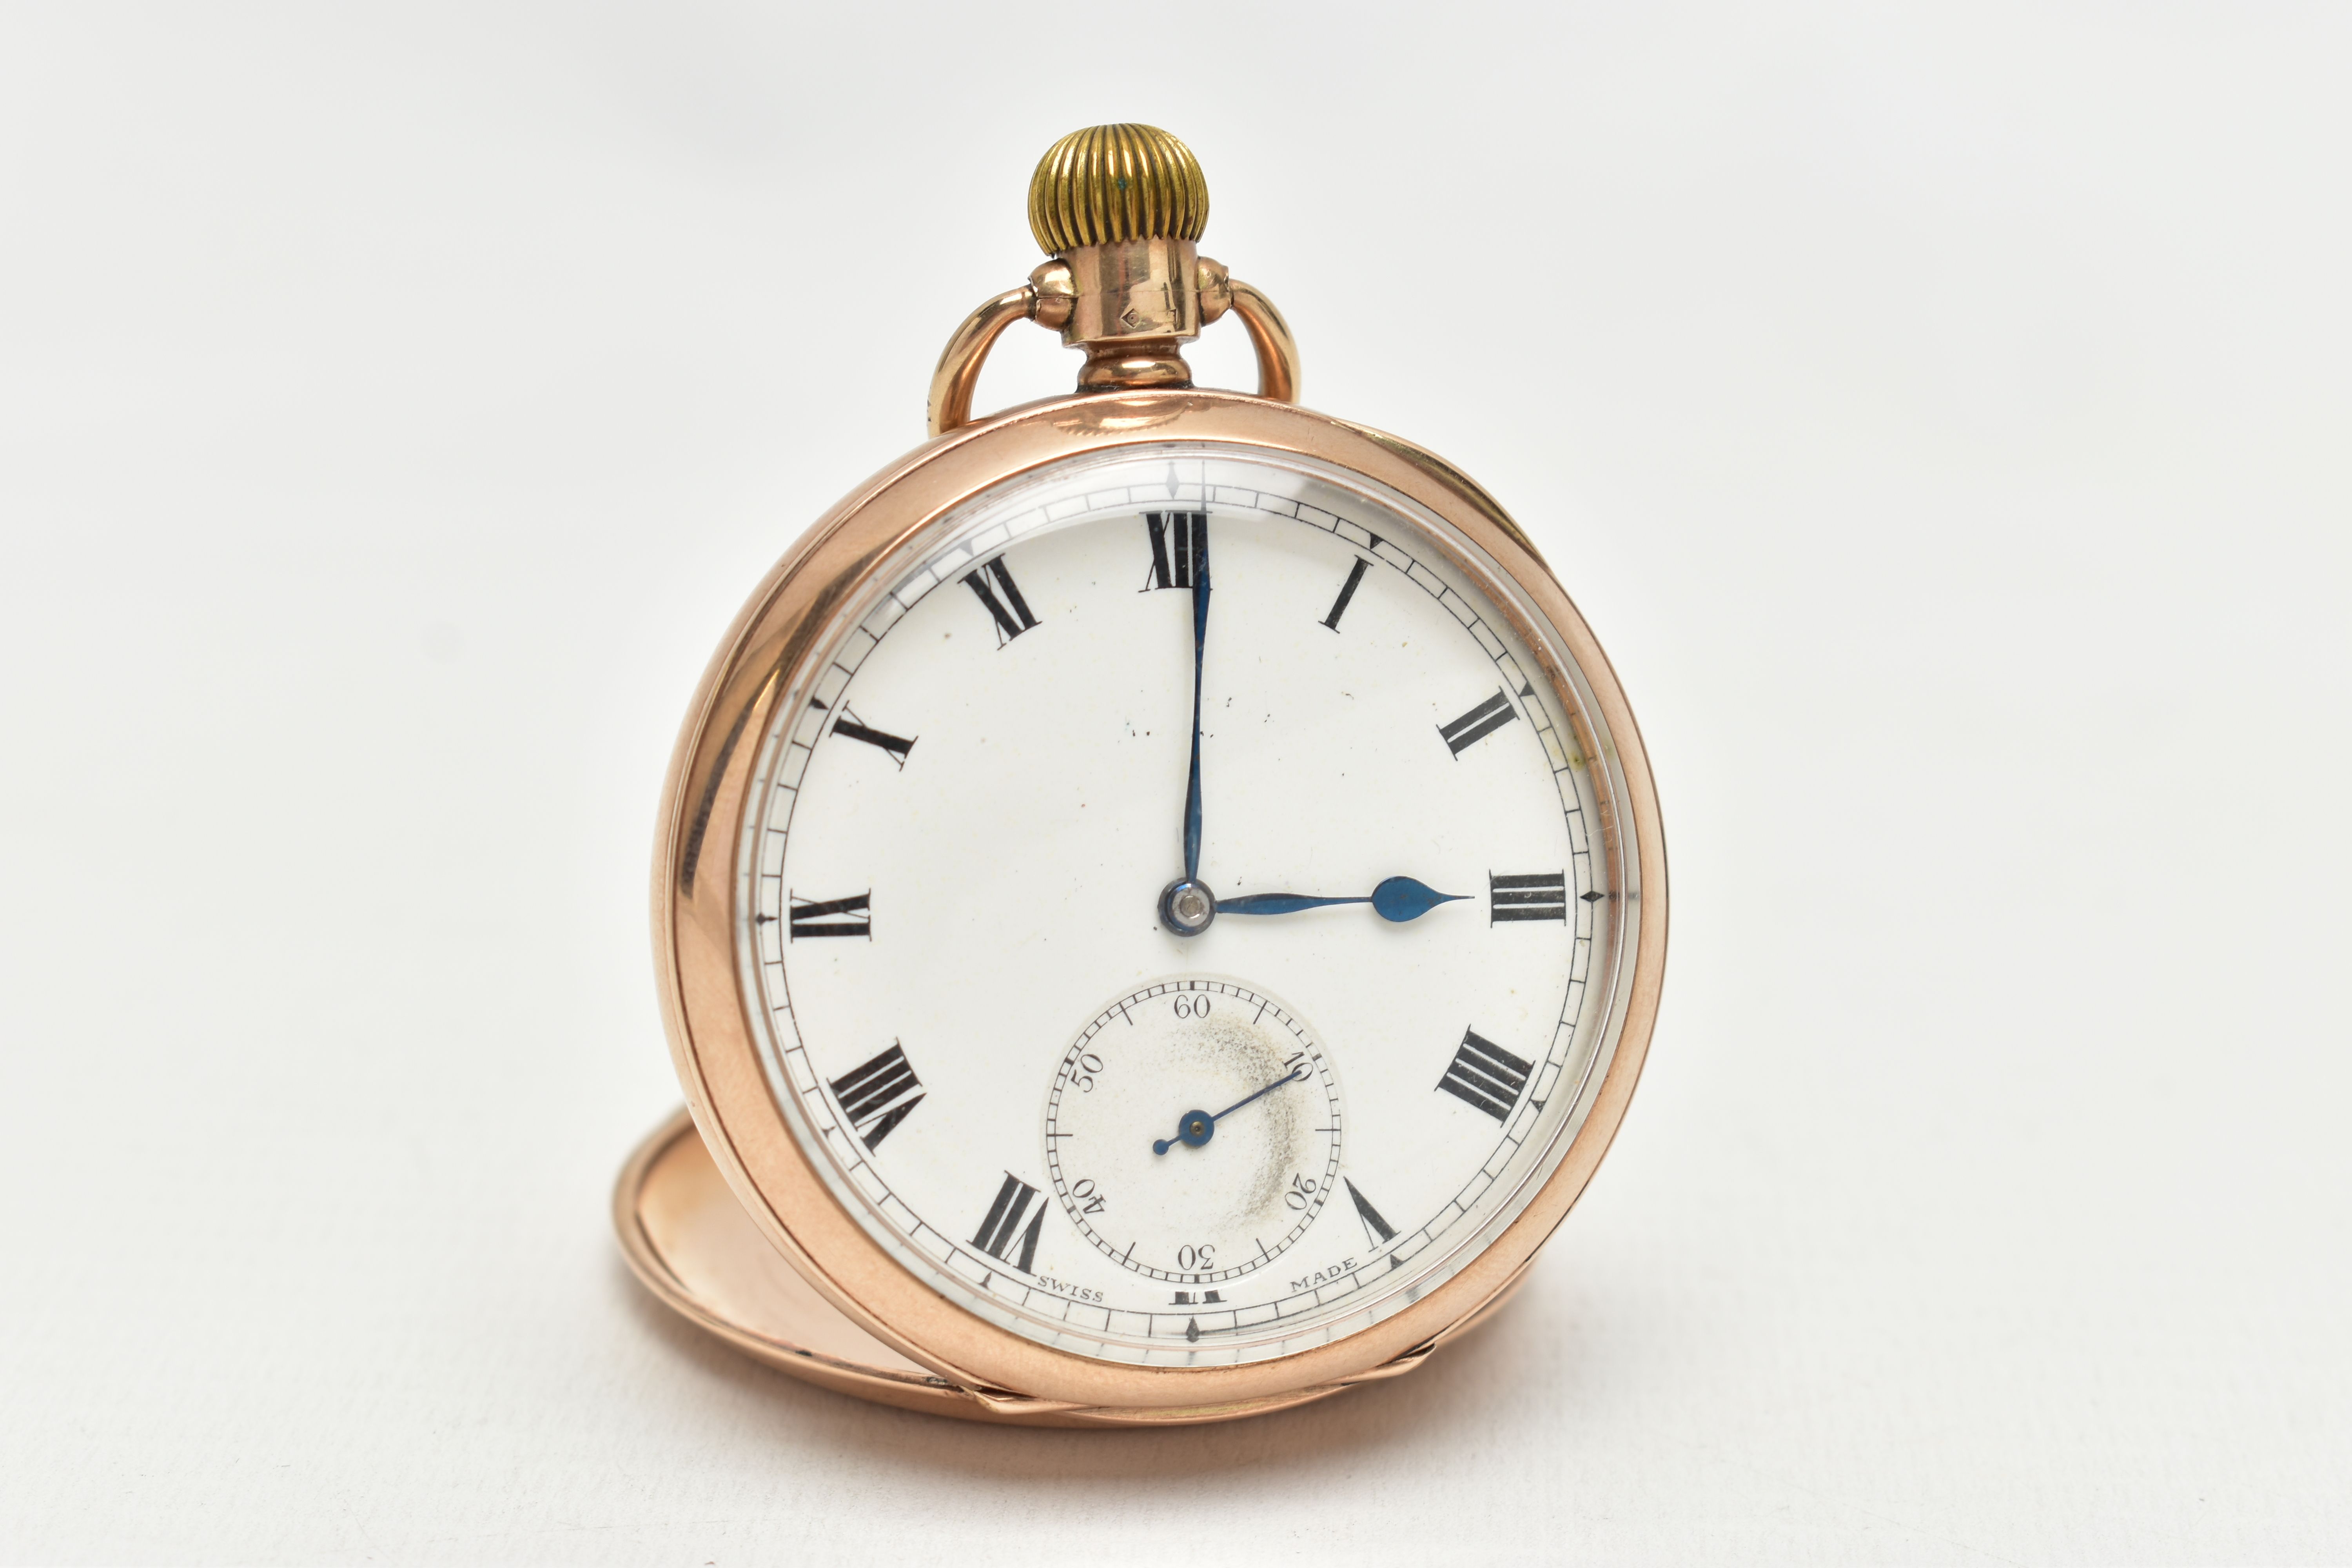 AN EARLY 20H CENTURY 9CT GOLD MANUAL WOUND OPEN FACE POCKET WATCH, the white enamel dial with